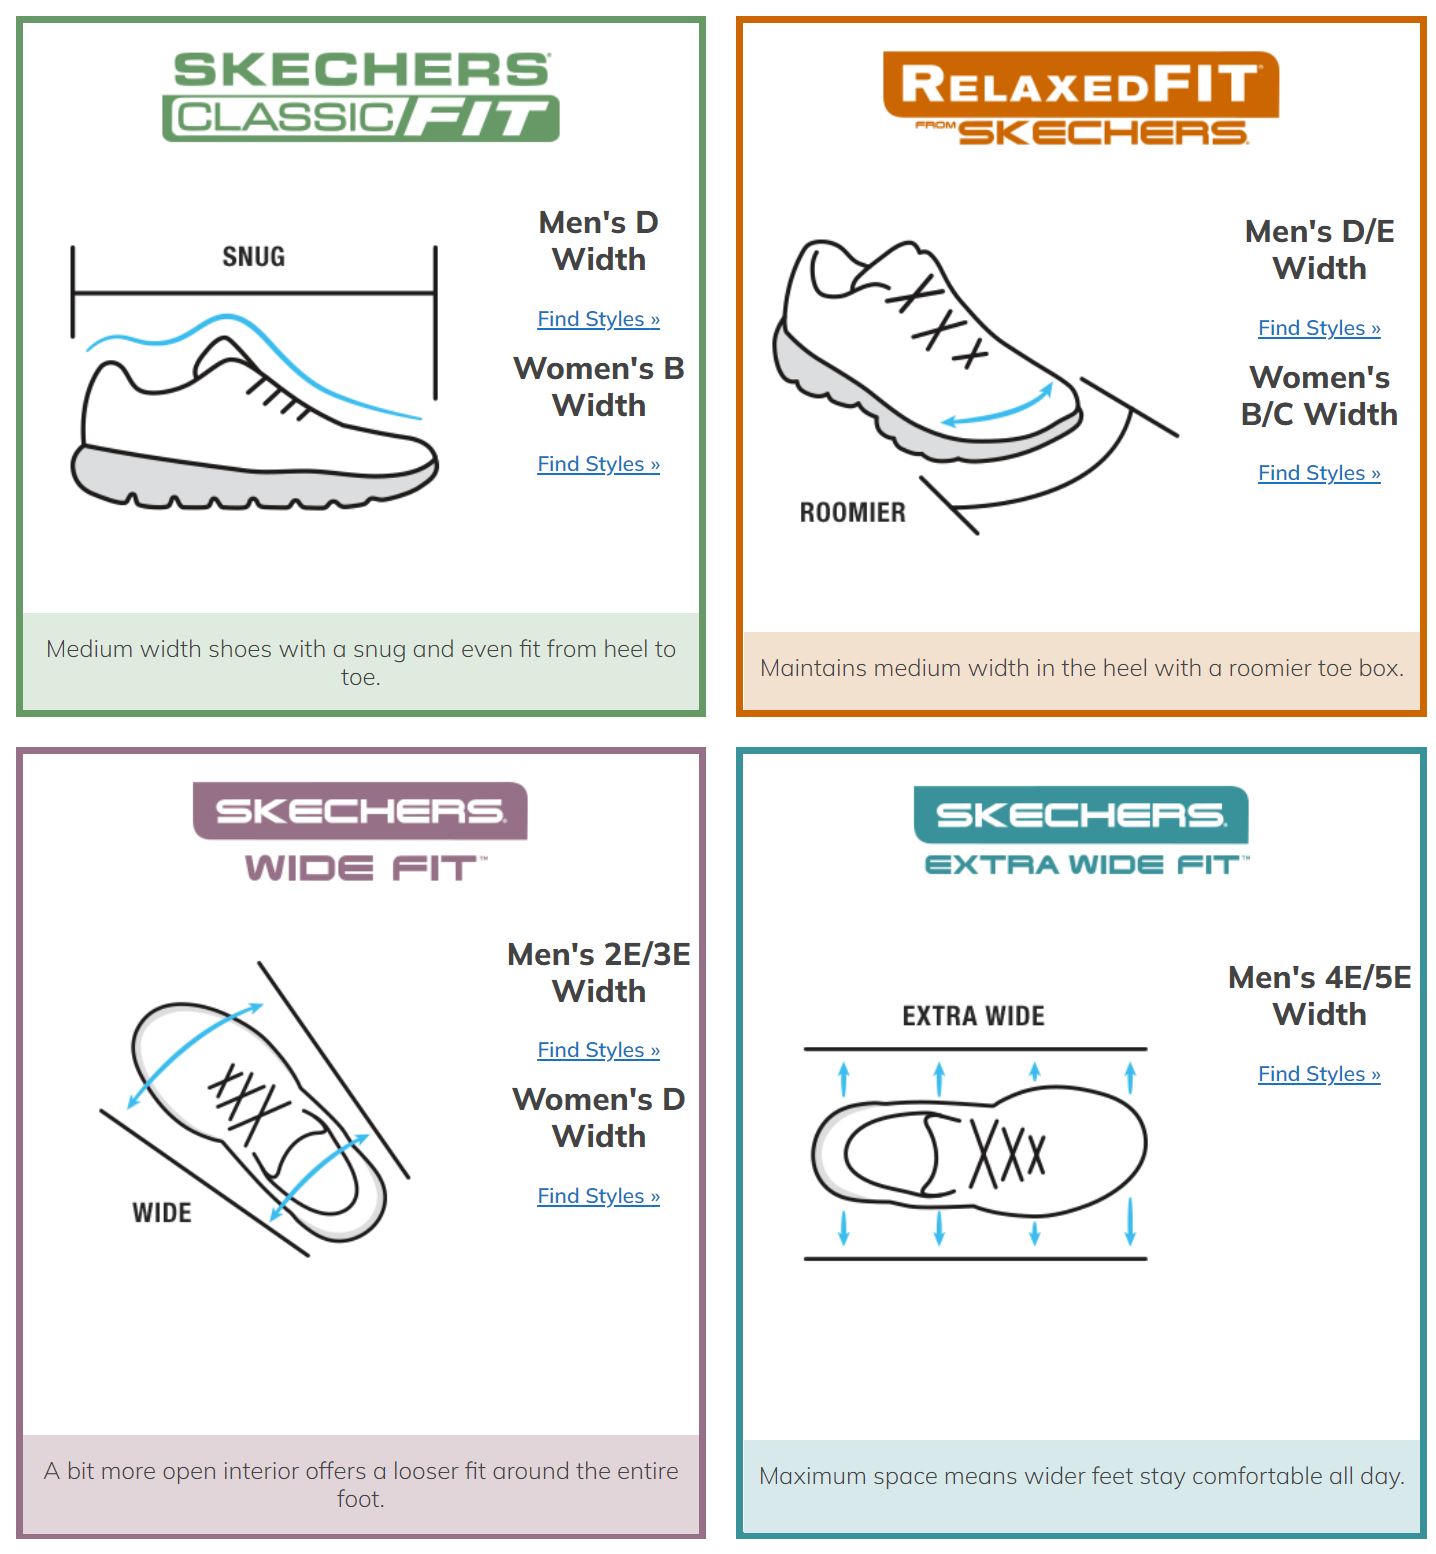 How Wide Are Skechers Extra Wide Shoes? - Shoe Effect